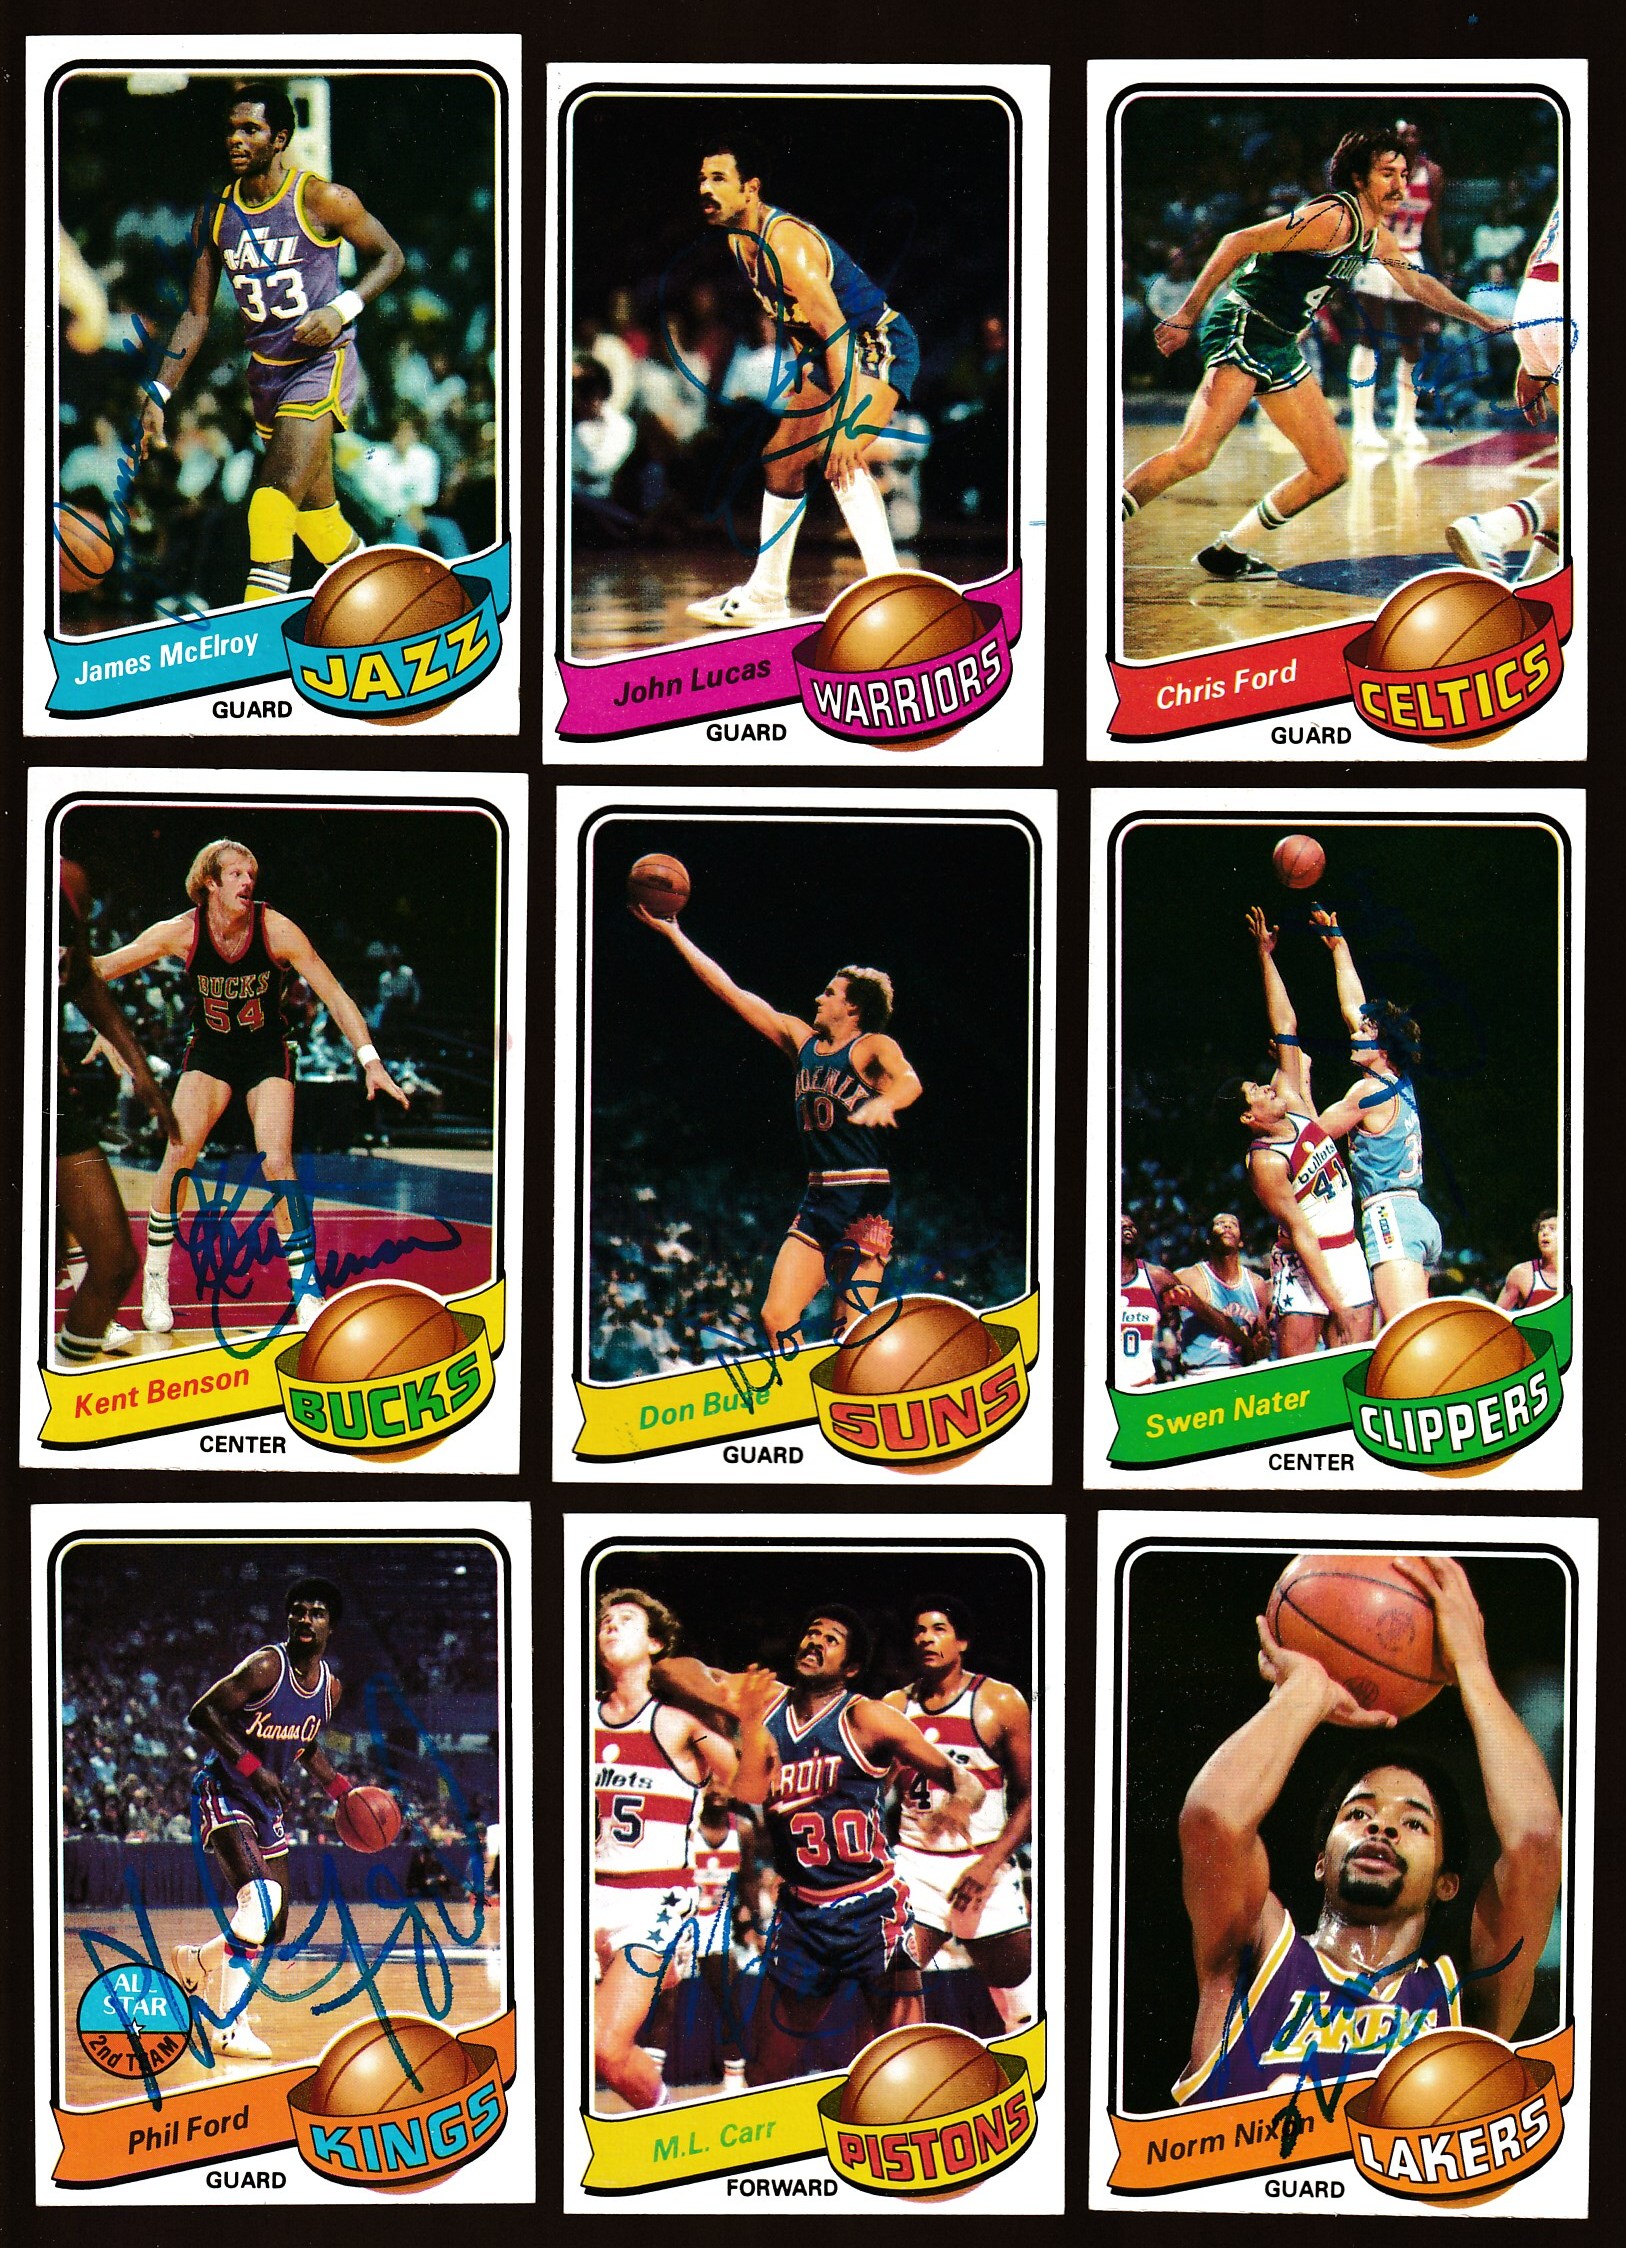 1979-80 Topps Basketball #114 Don Buse AUTOGRAPHED (Suns) Basketball cards value